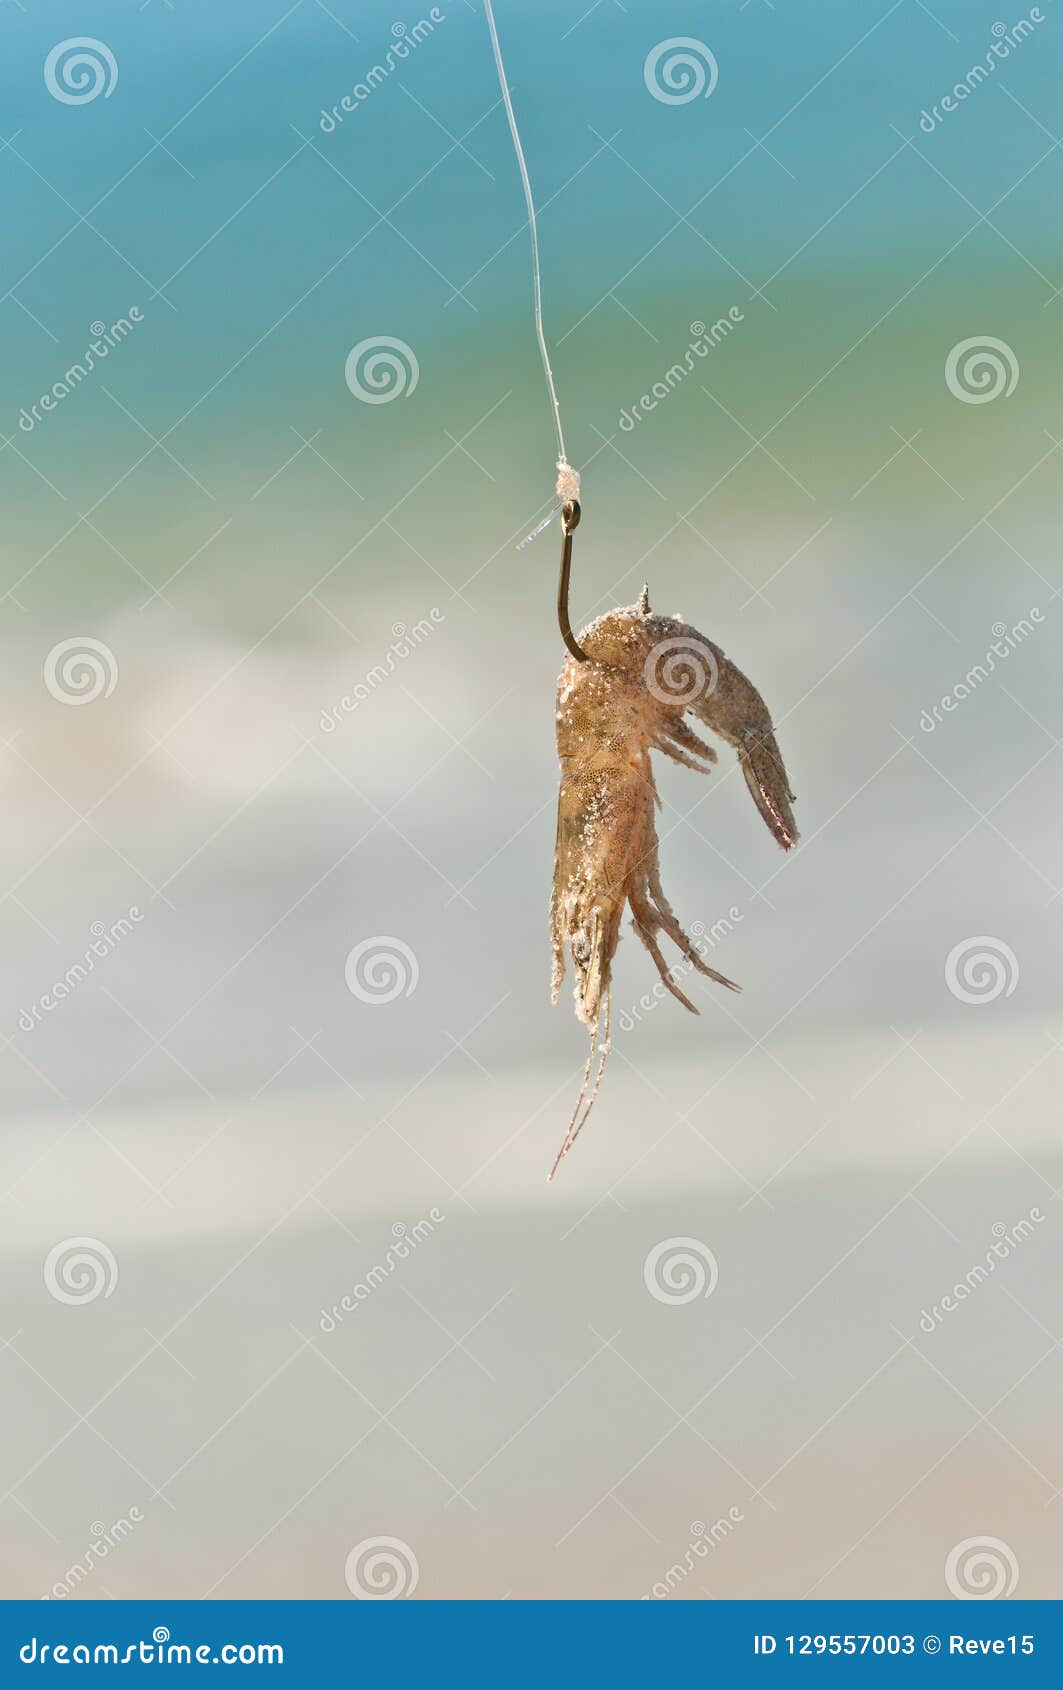 https://thumbs.dreamstime.com/z/front-view-close-up-live-shrimp-hook-line-used-as-bait-fishing-shoreline-tropical-beach-gulf-129557003.jpg